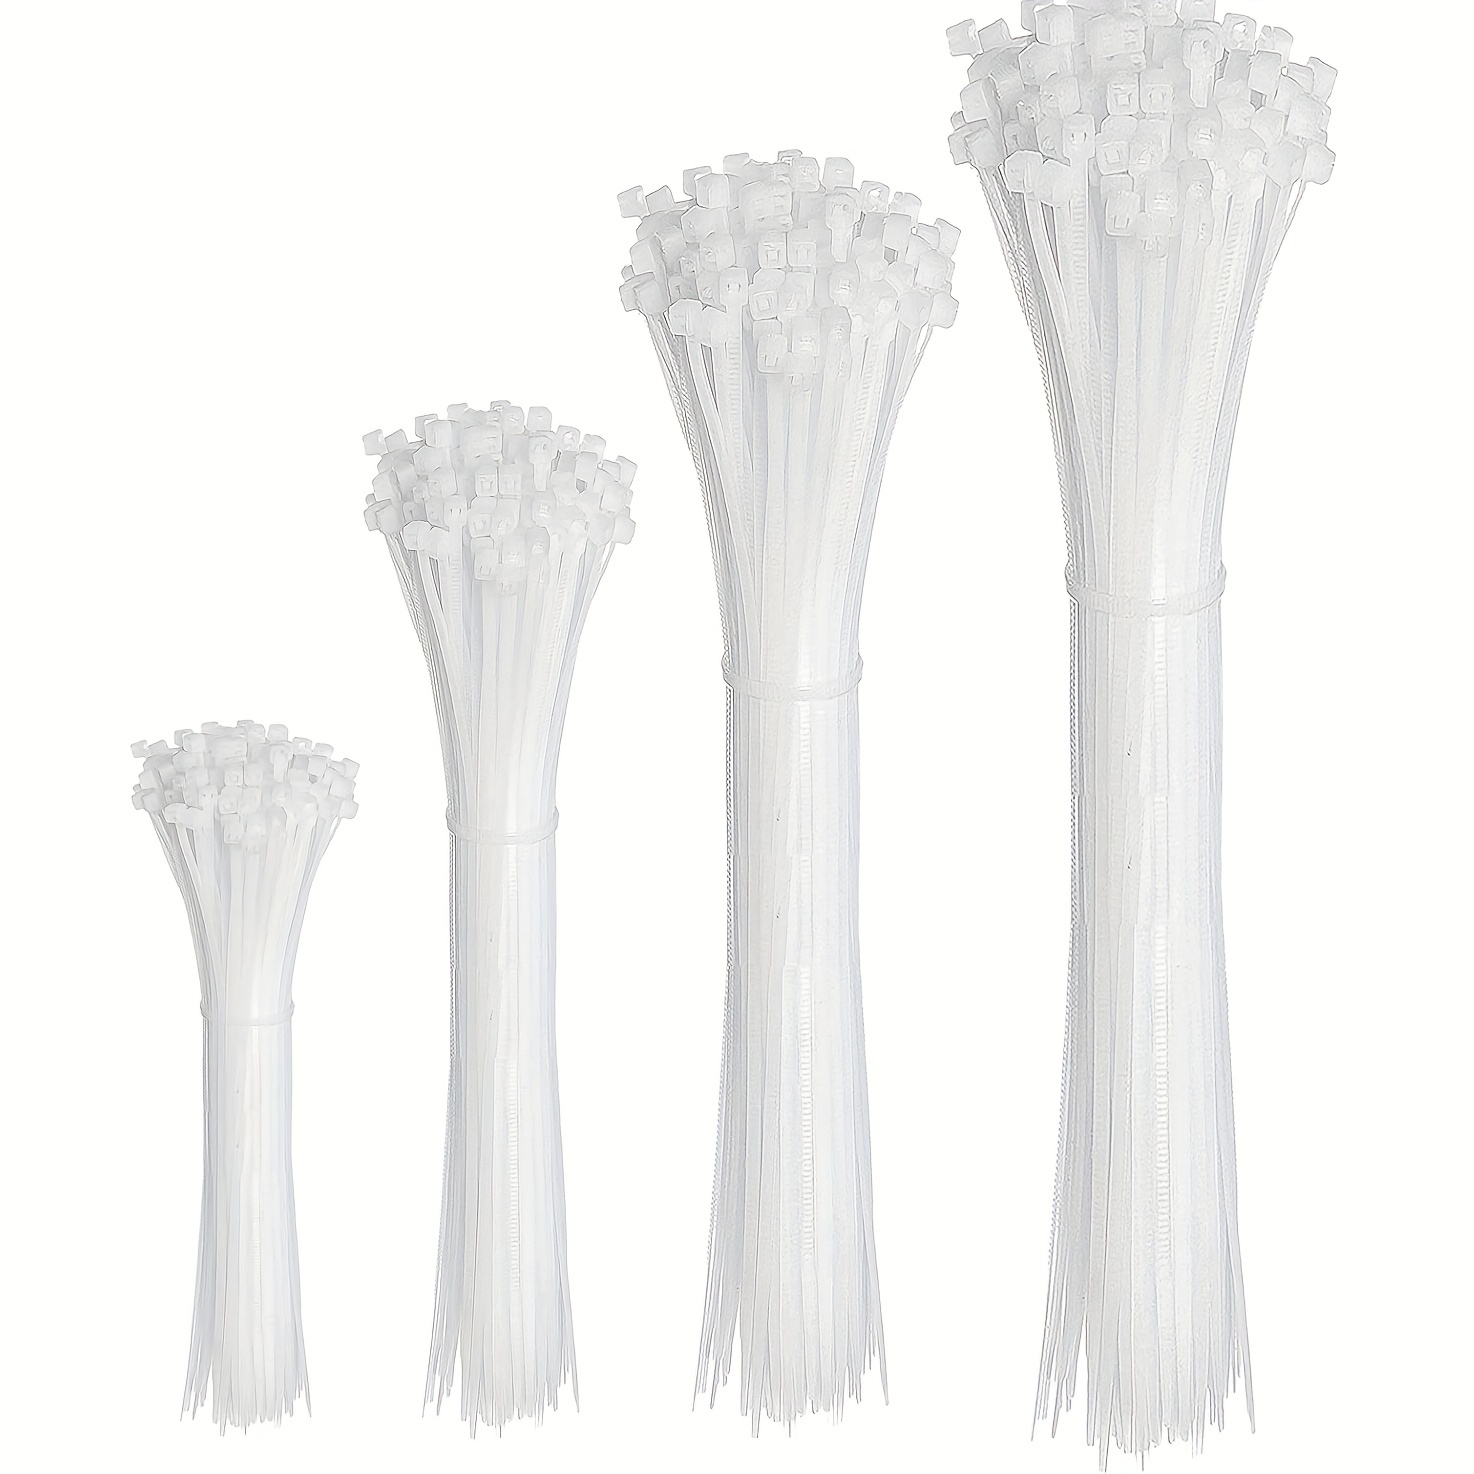 

100/200pcs Cable Zip Ties, White Zip Ties Assorted Sizes 12+8+6+4 Inch, Multi-purpose Self-locking Nylon Cable Ties Cord Management Ties, Plastic Wire Ties For Office, Workshop